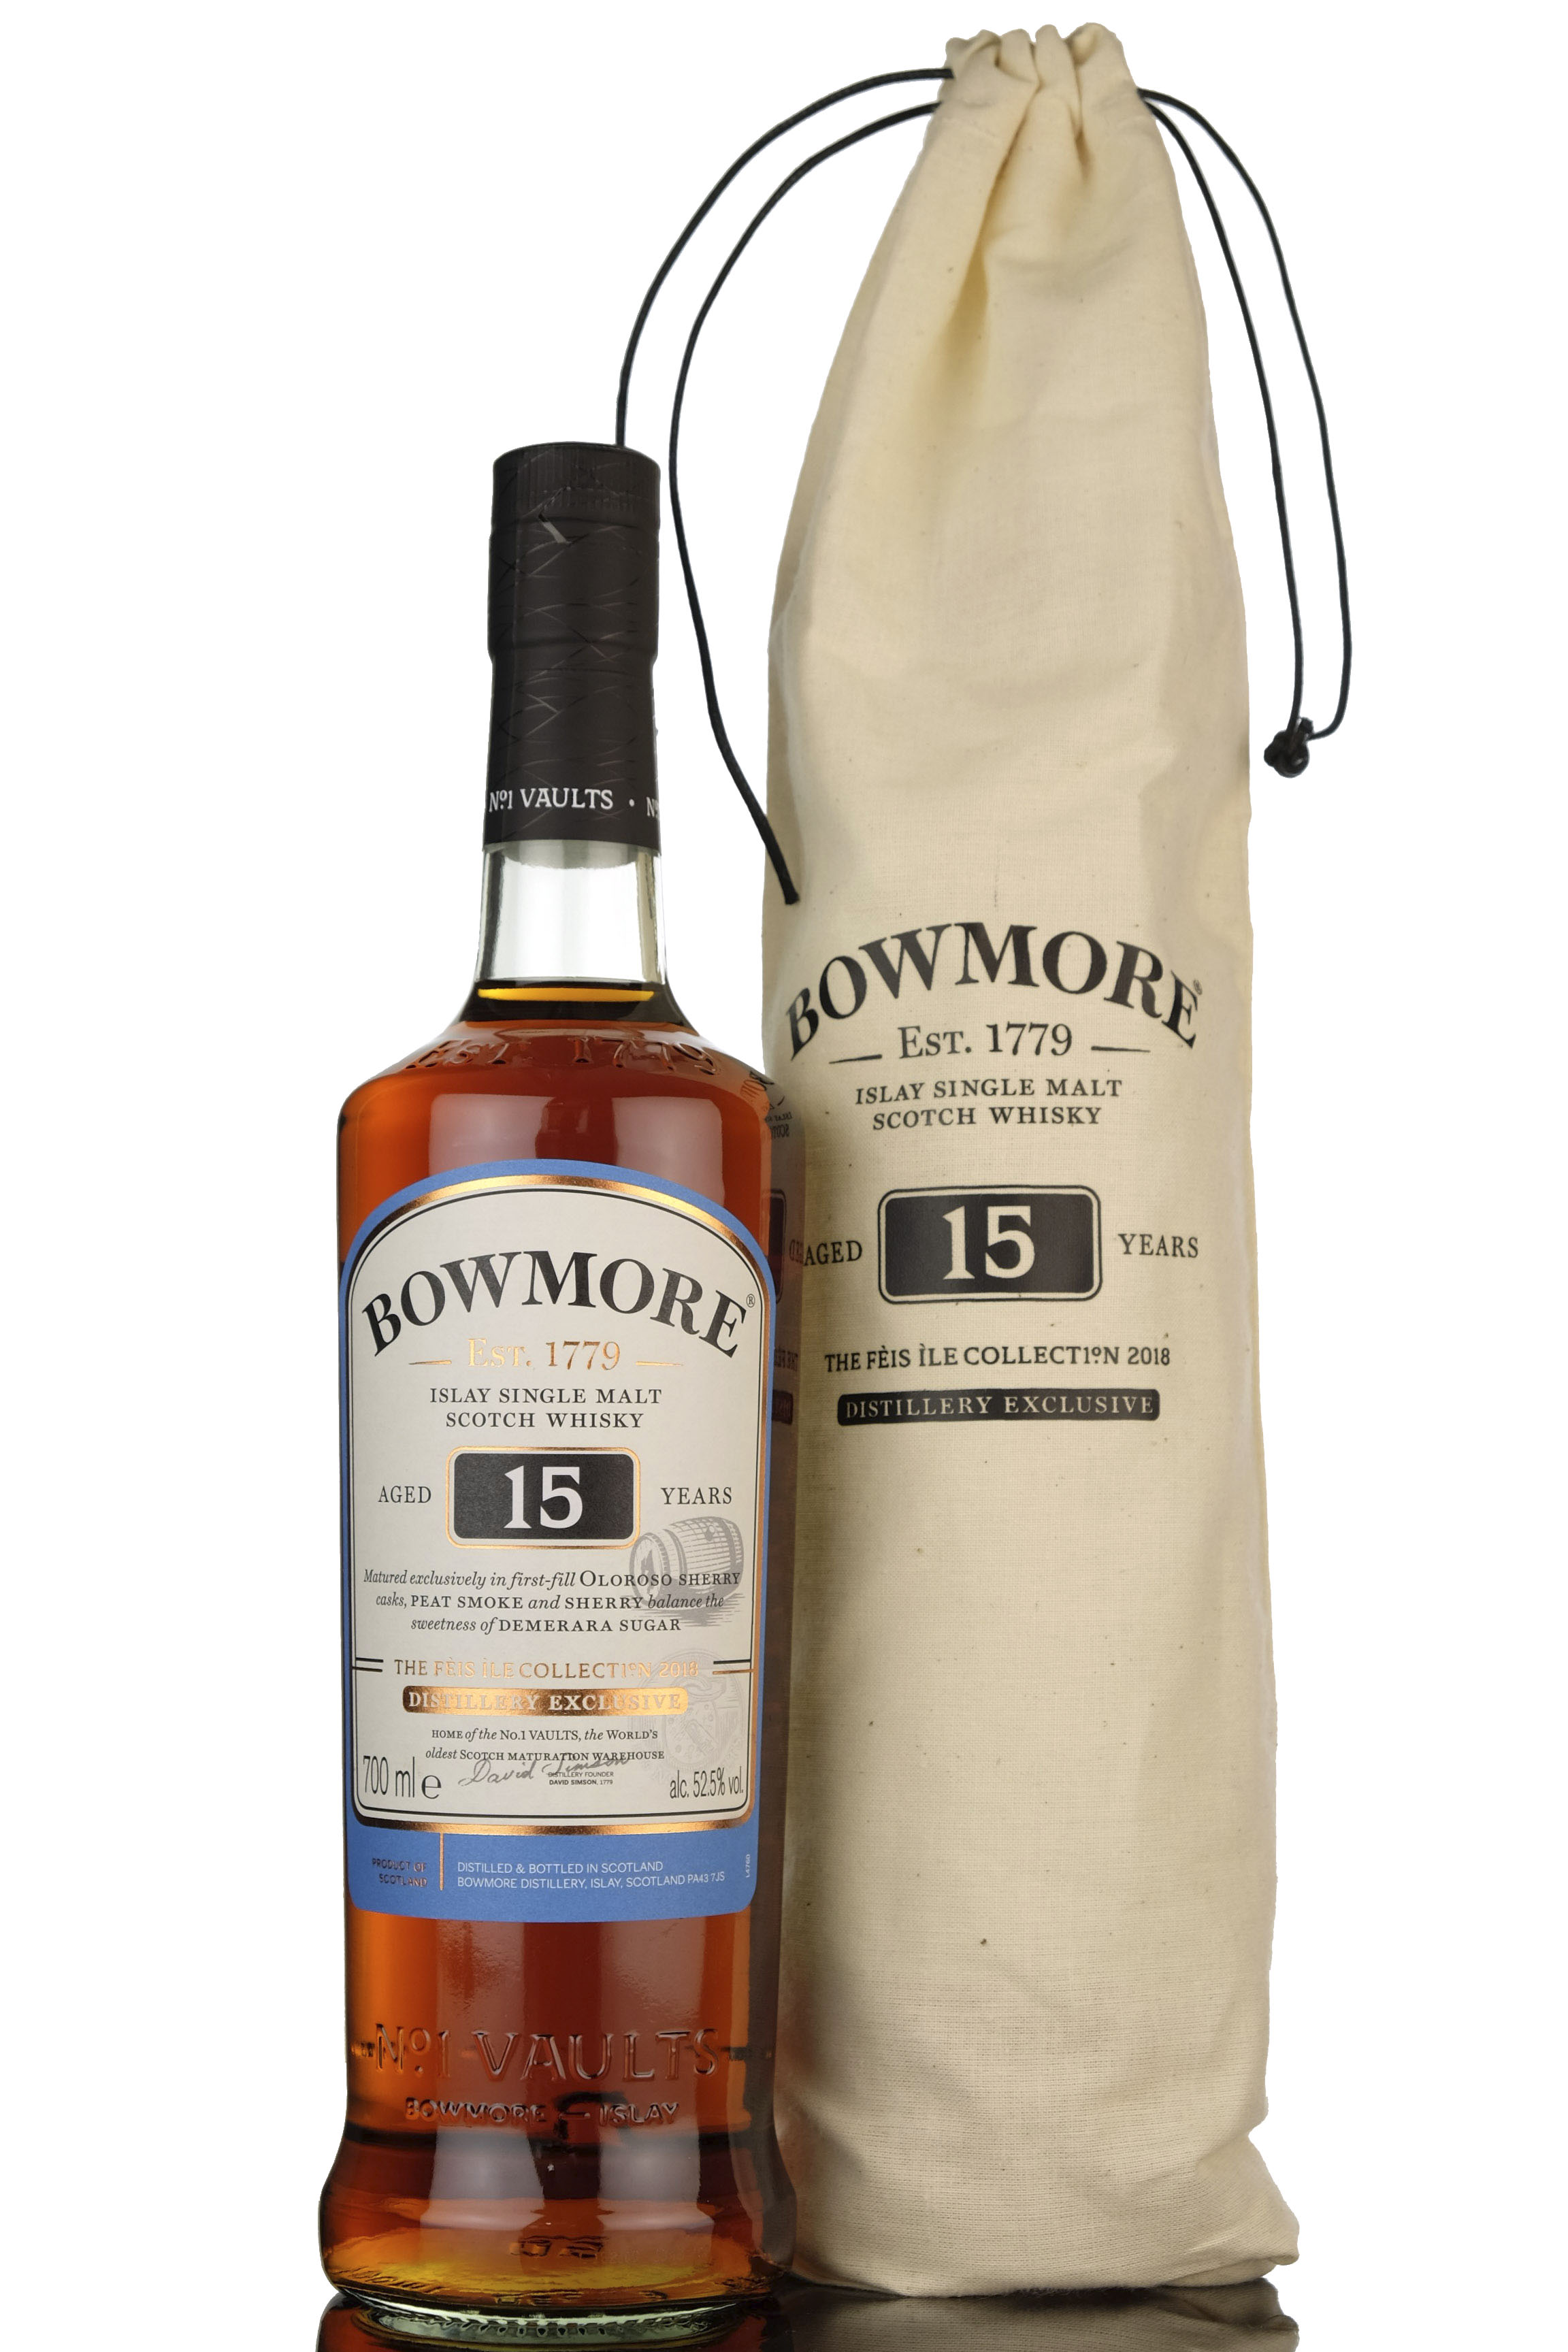 Bowmore 15 Year Old - Festival 2018